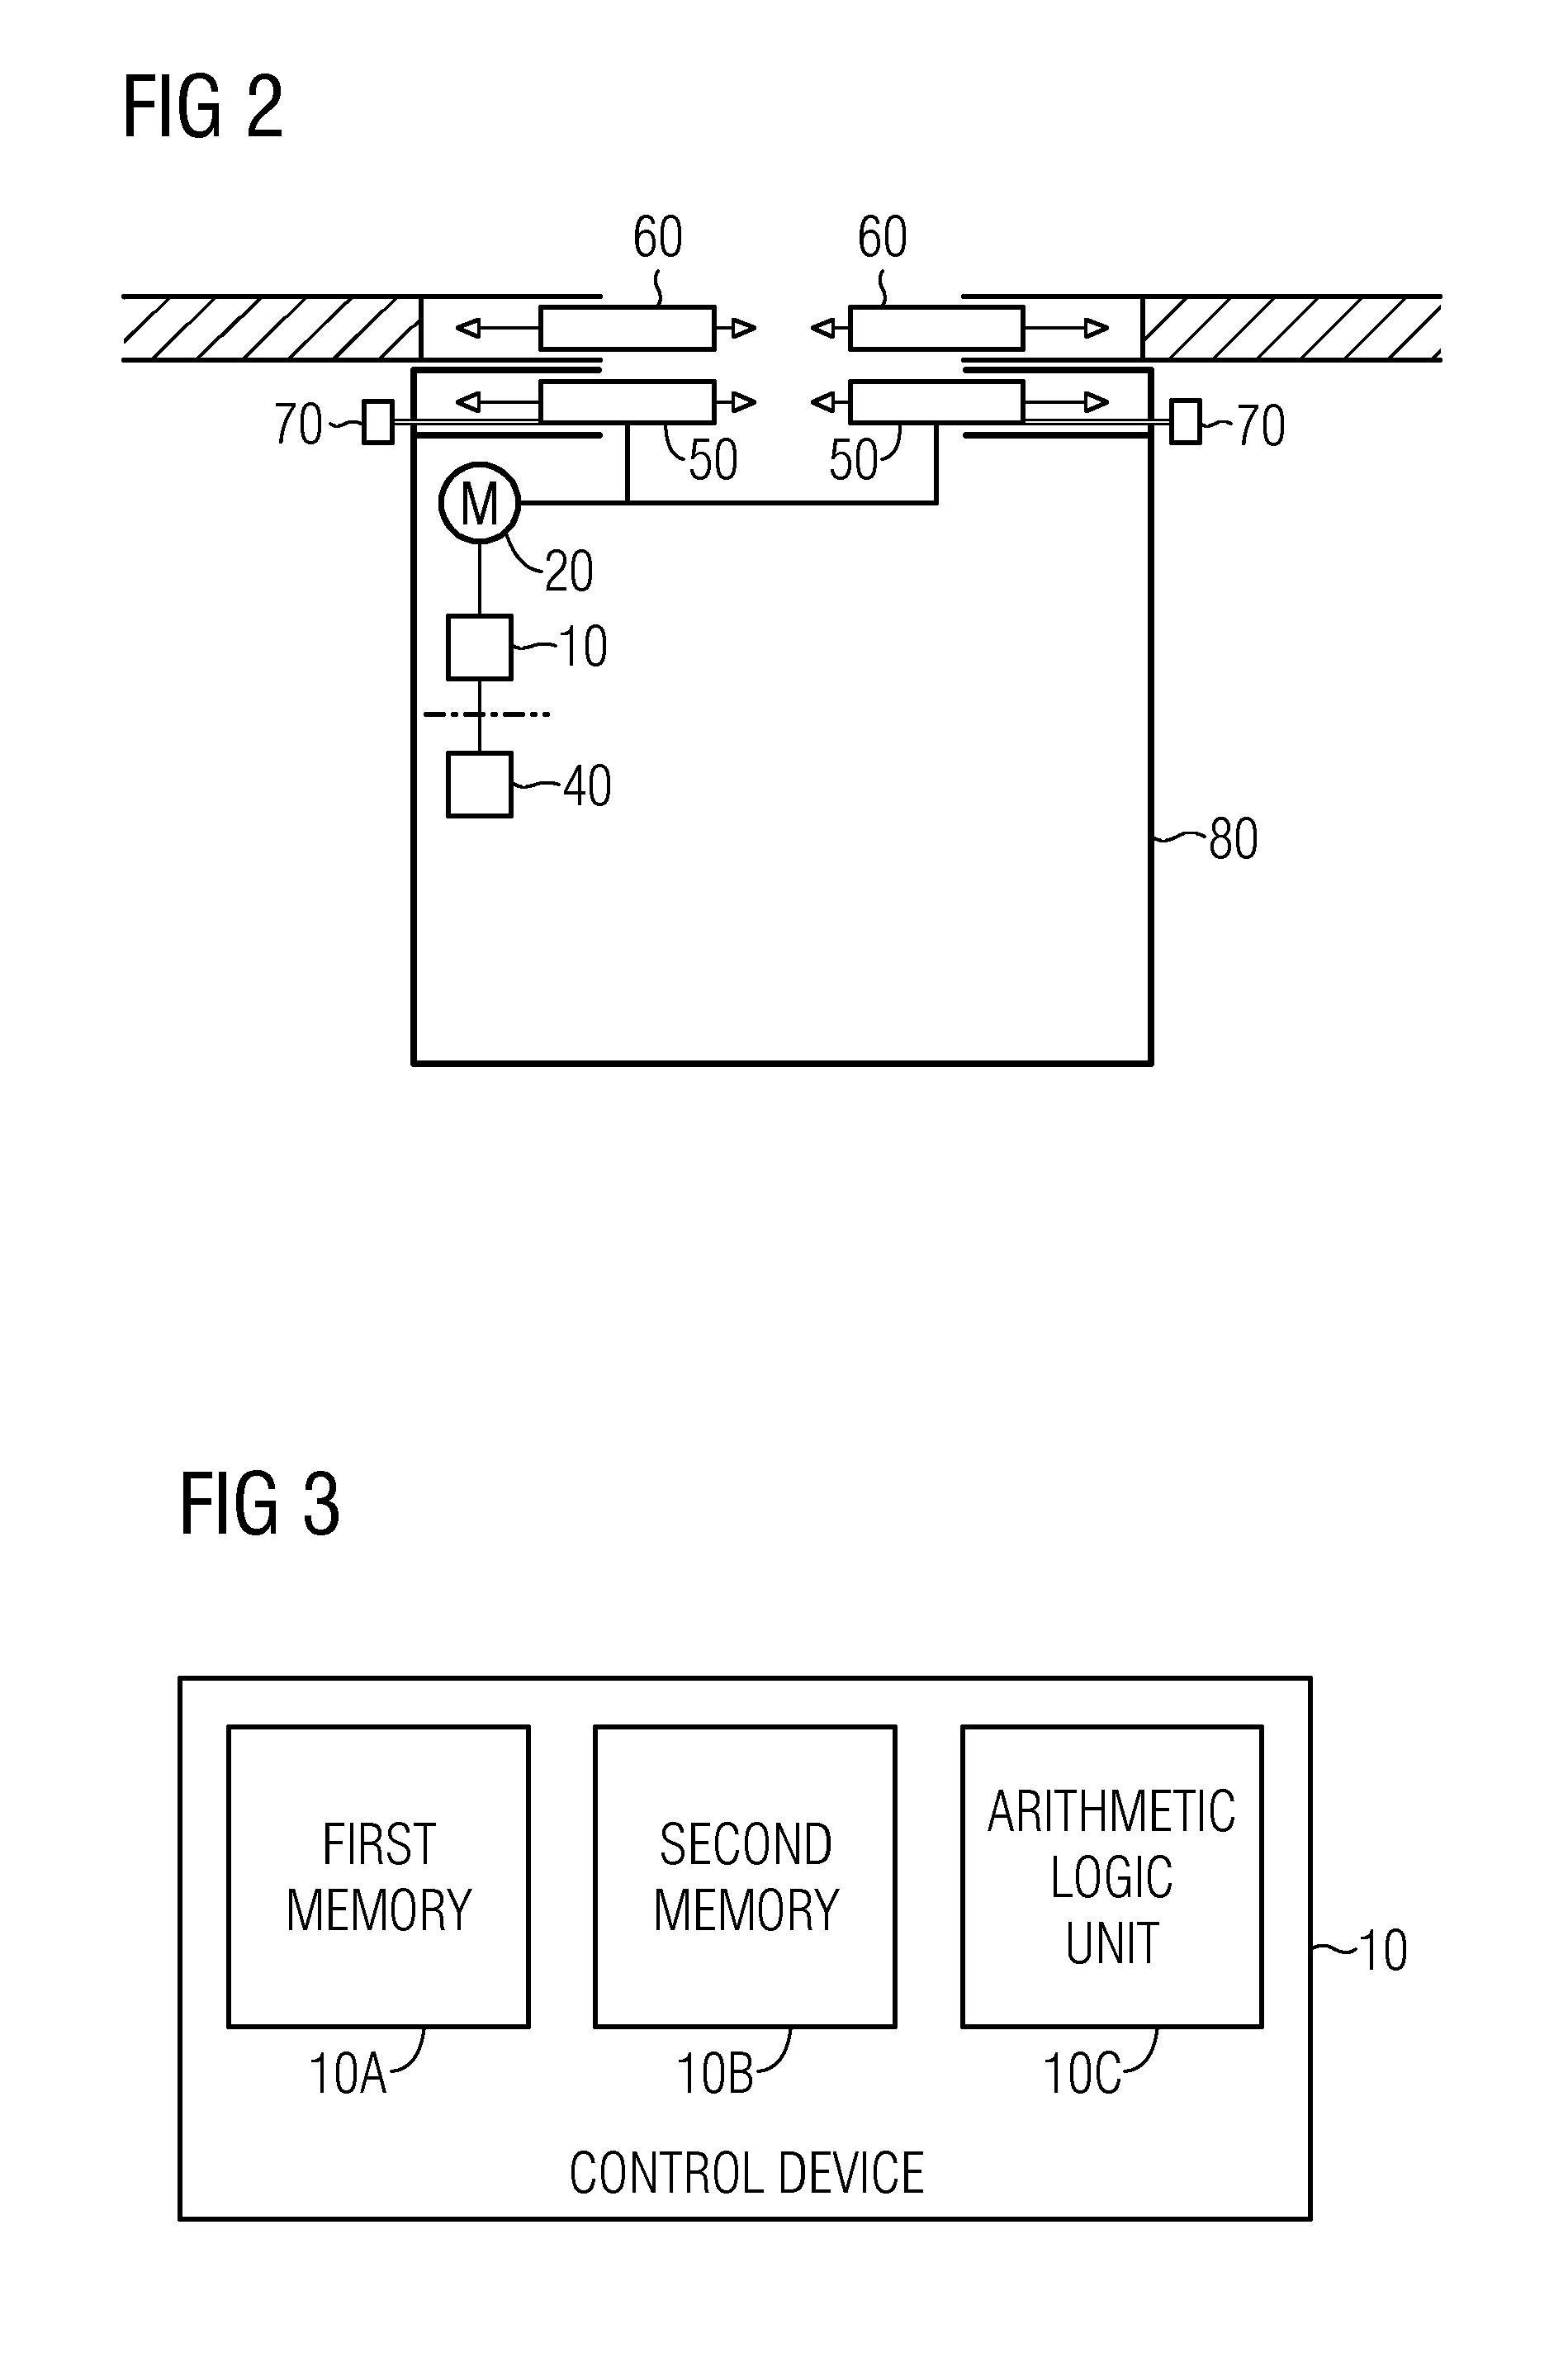 Method and control device for automatically determining a mass of a door system